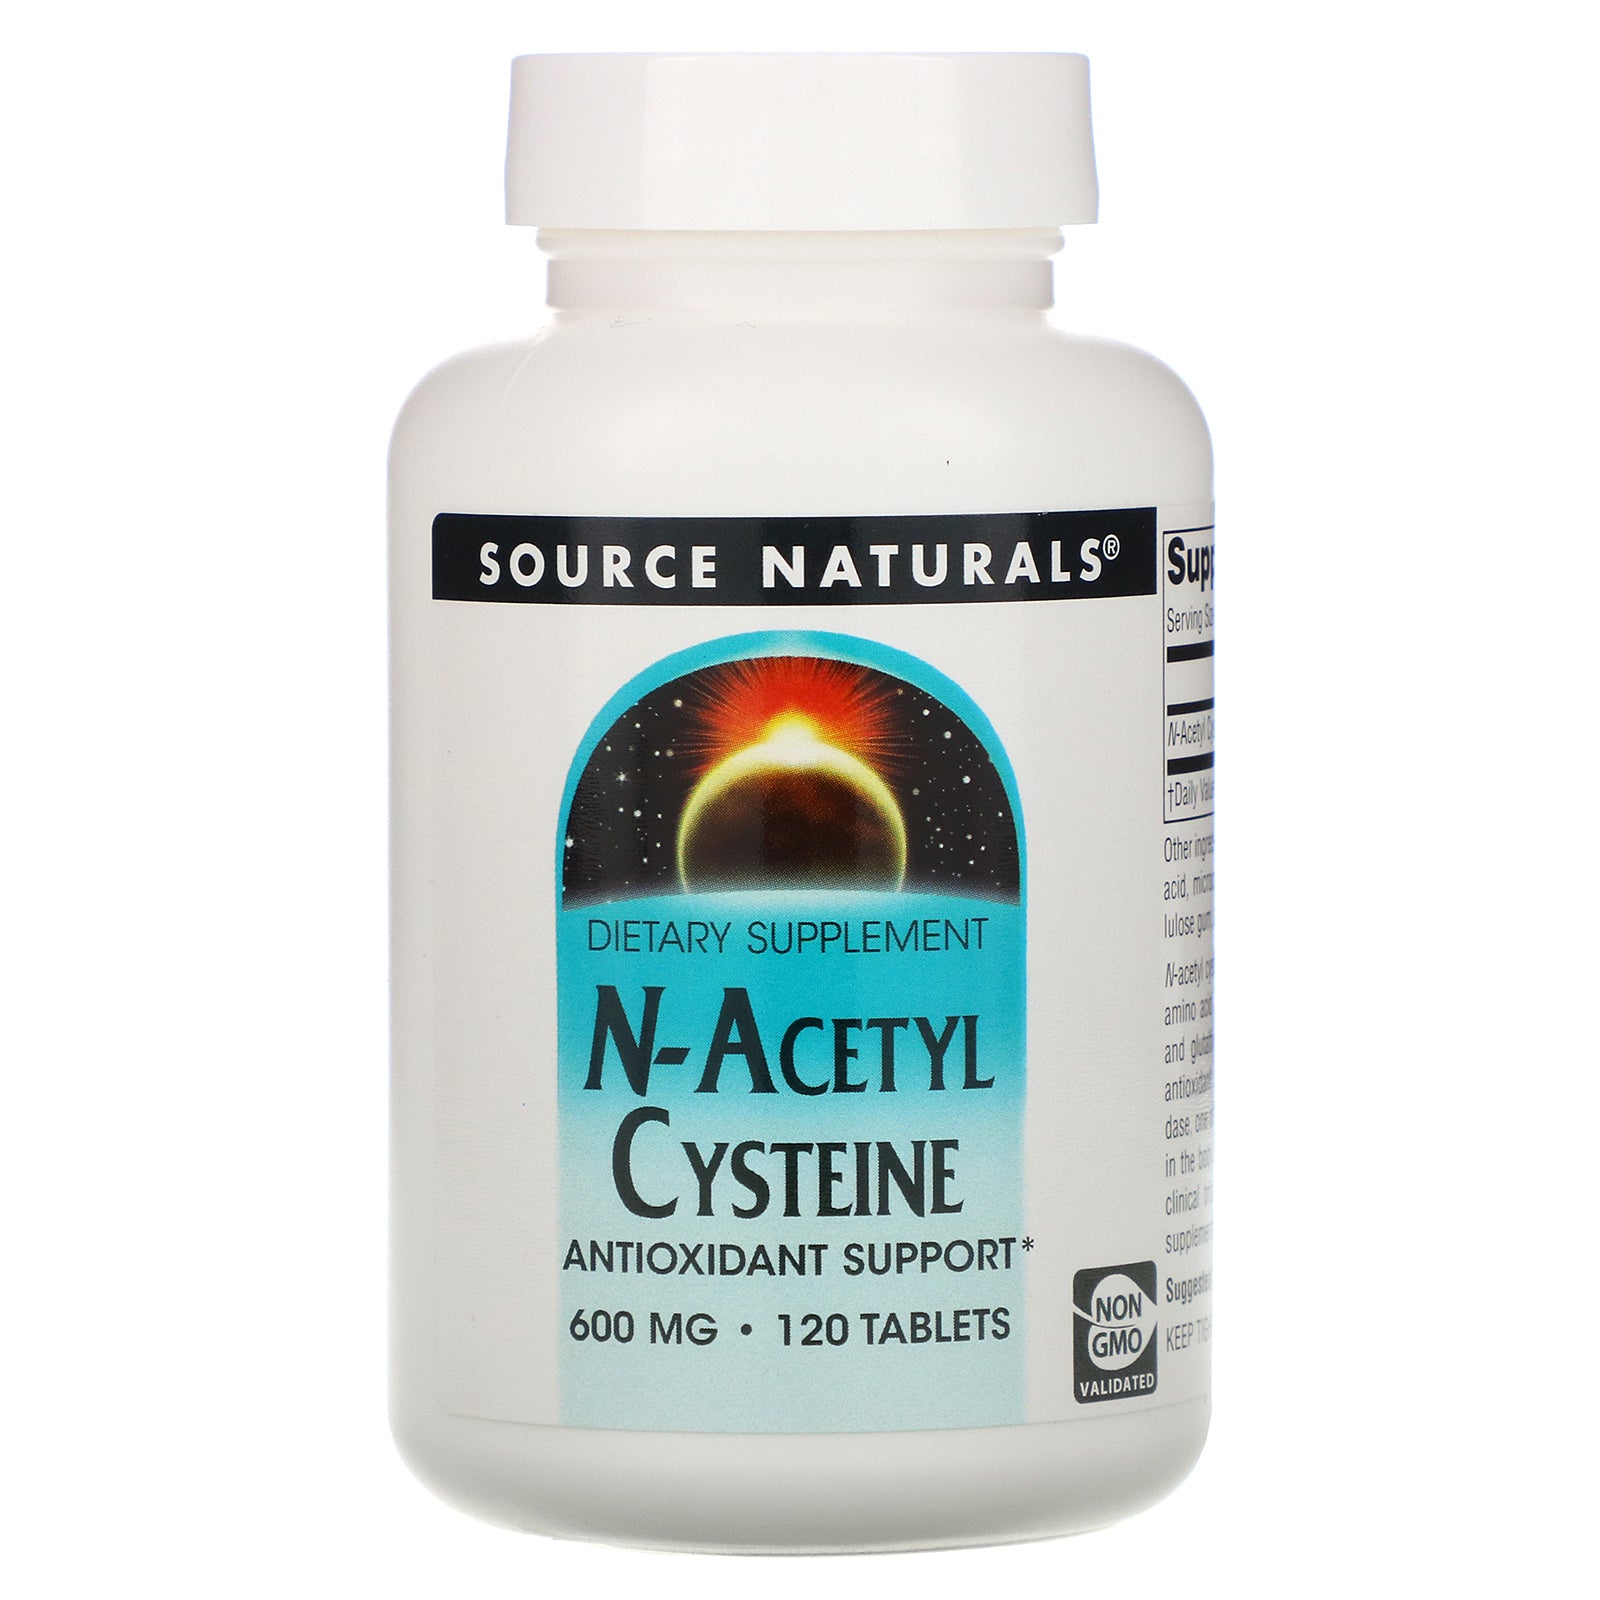 Source Naturals, N-Acetyl Cysteine, 600 mg, 120 Tablets